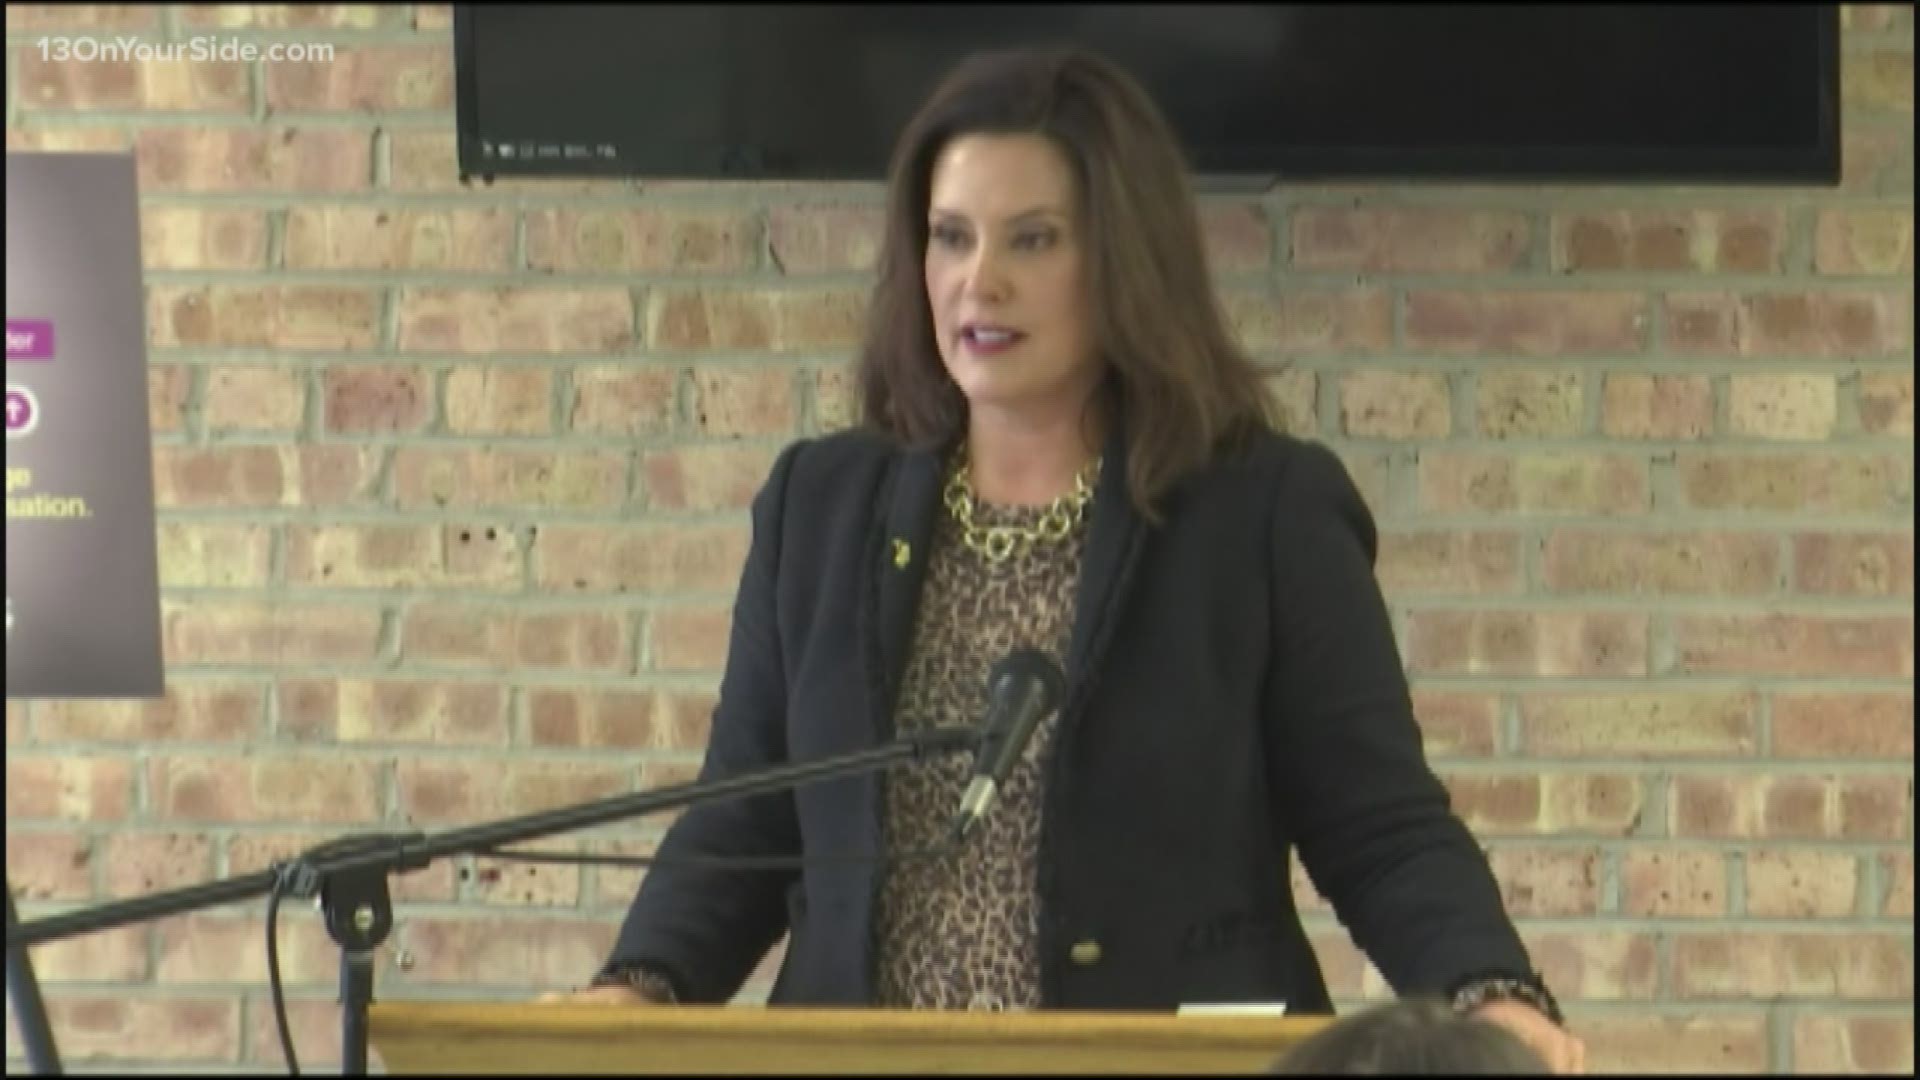 Governor Gretchen Whitmer is launching initiatives to cut opioid overdose deaths in half over the next five years.